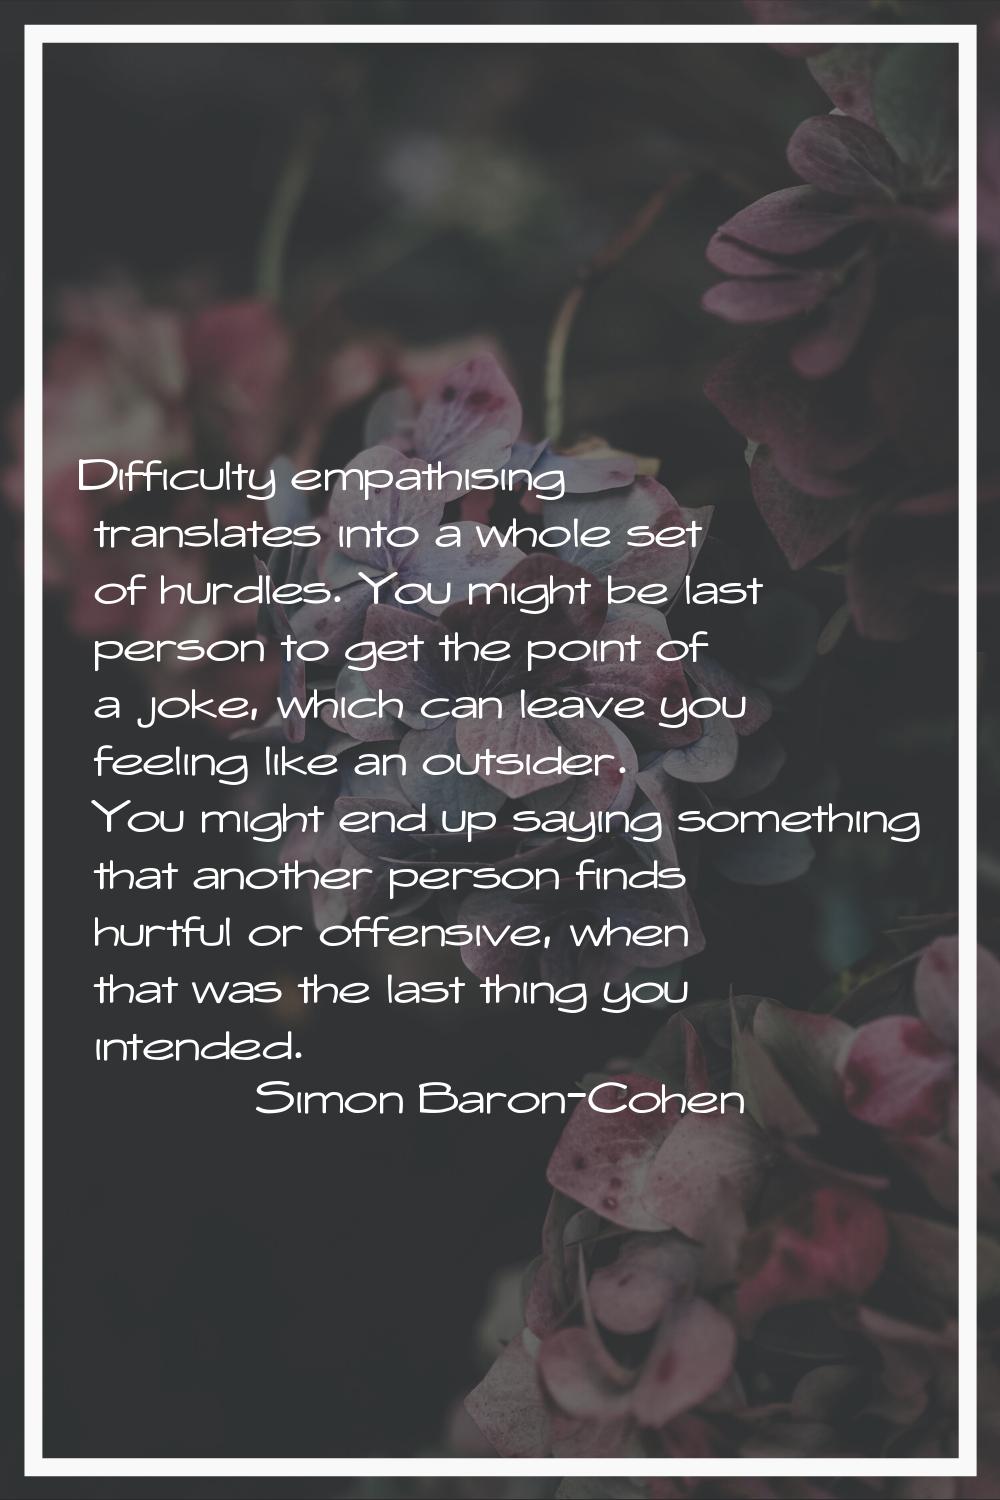 Difficulty empathising translates into a whole set of hurdles. You might be last person to get the 